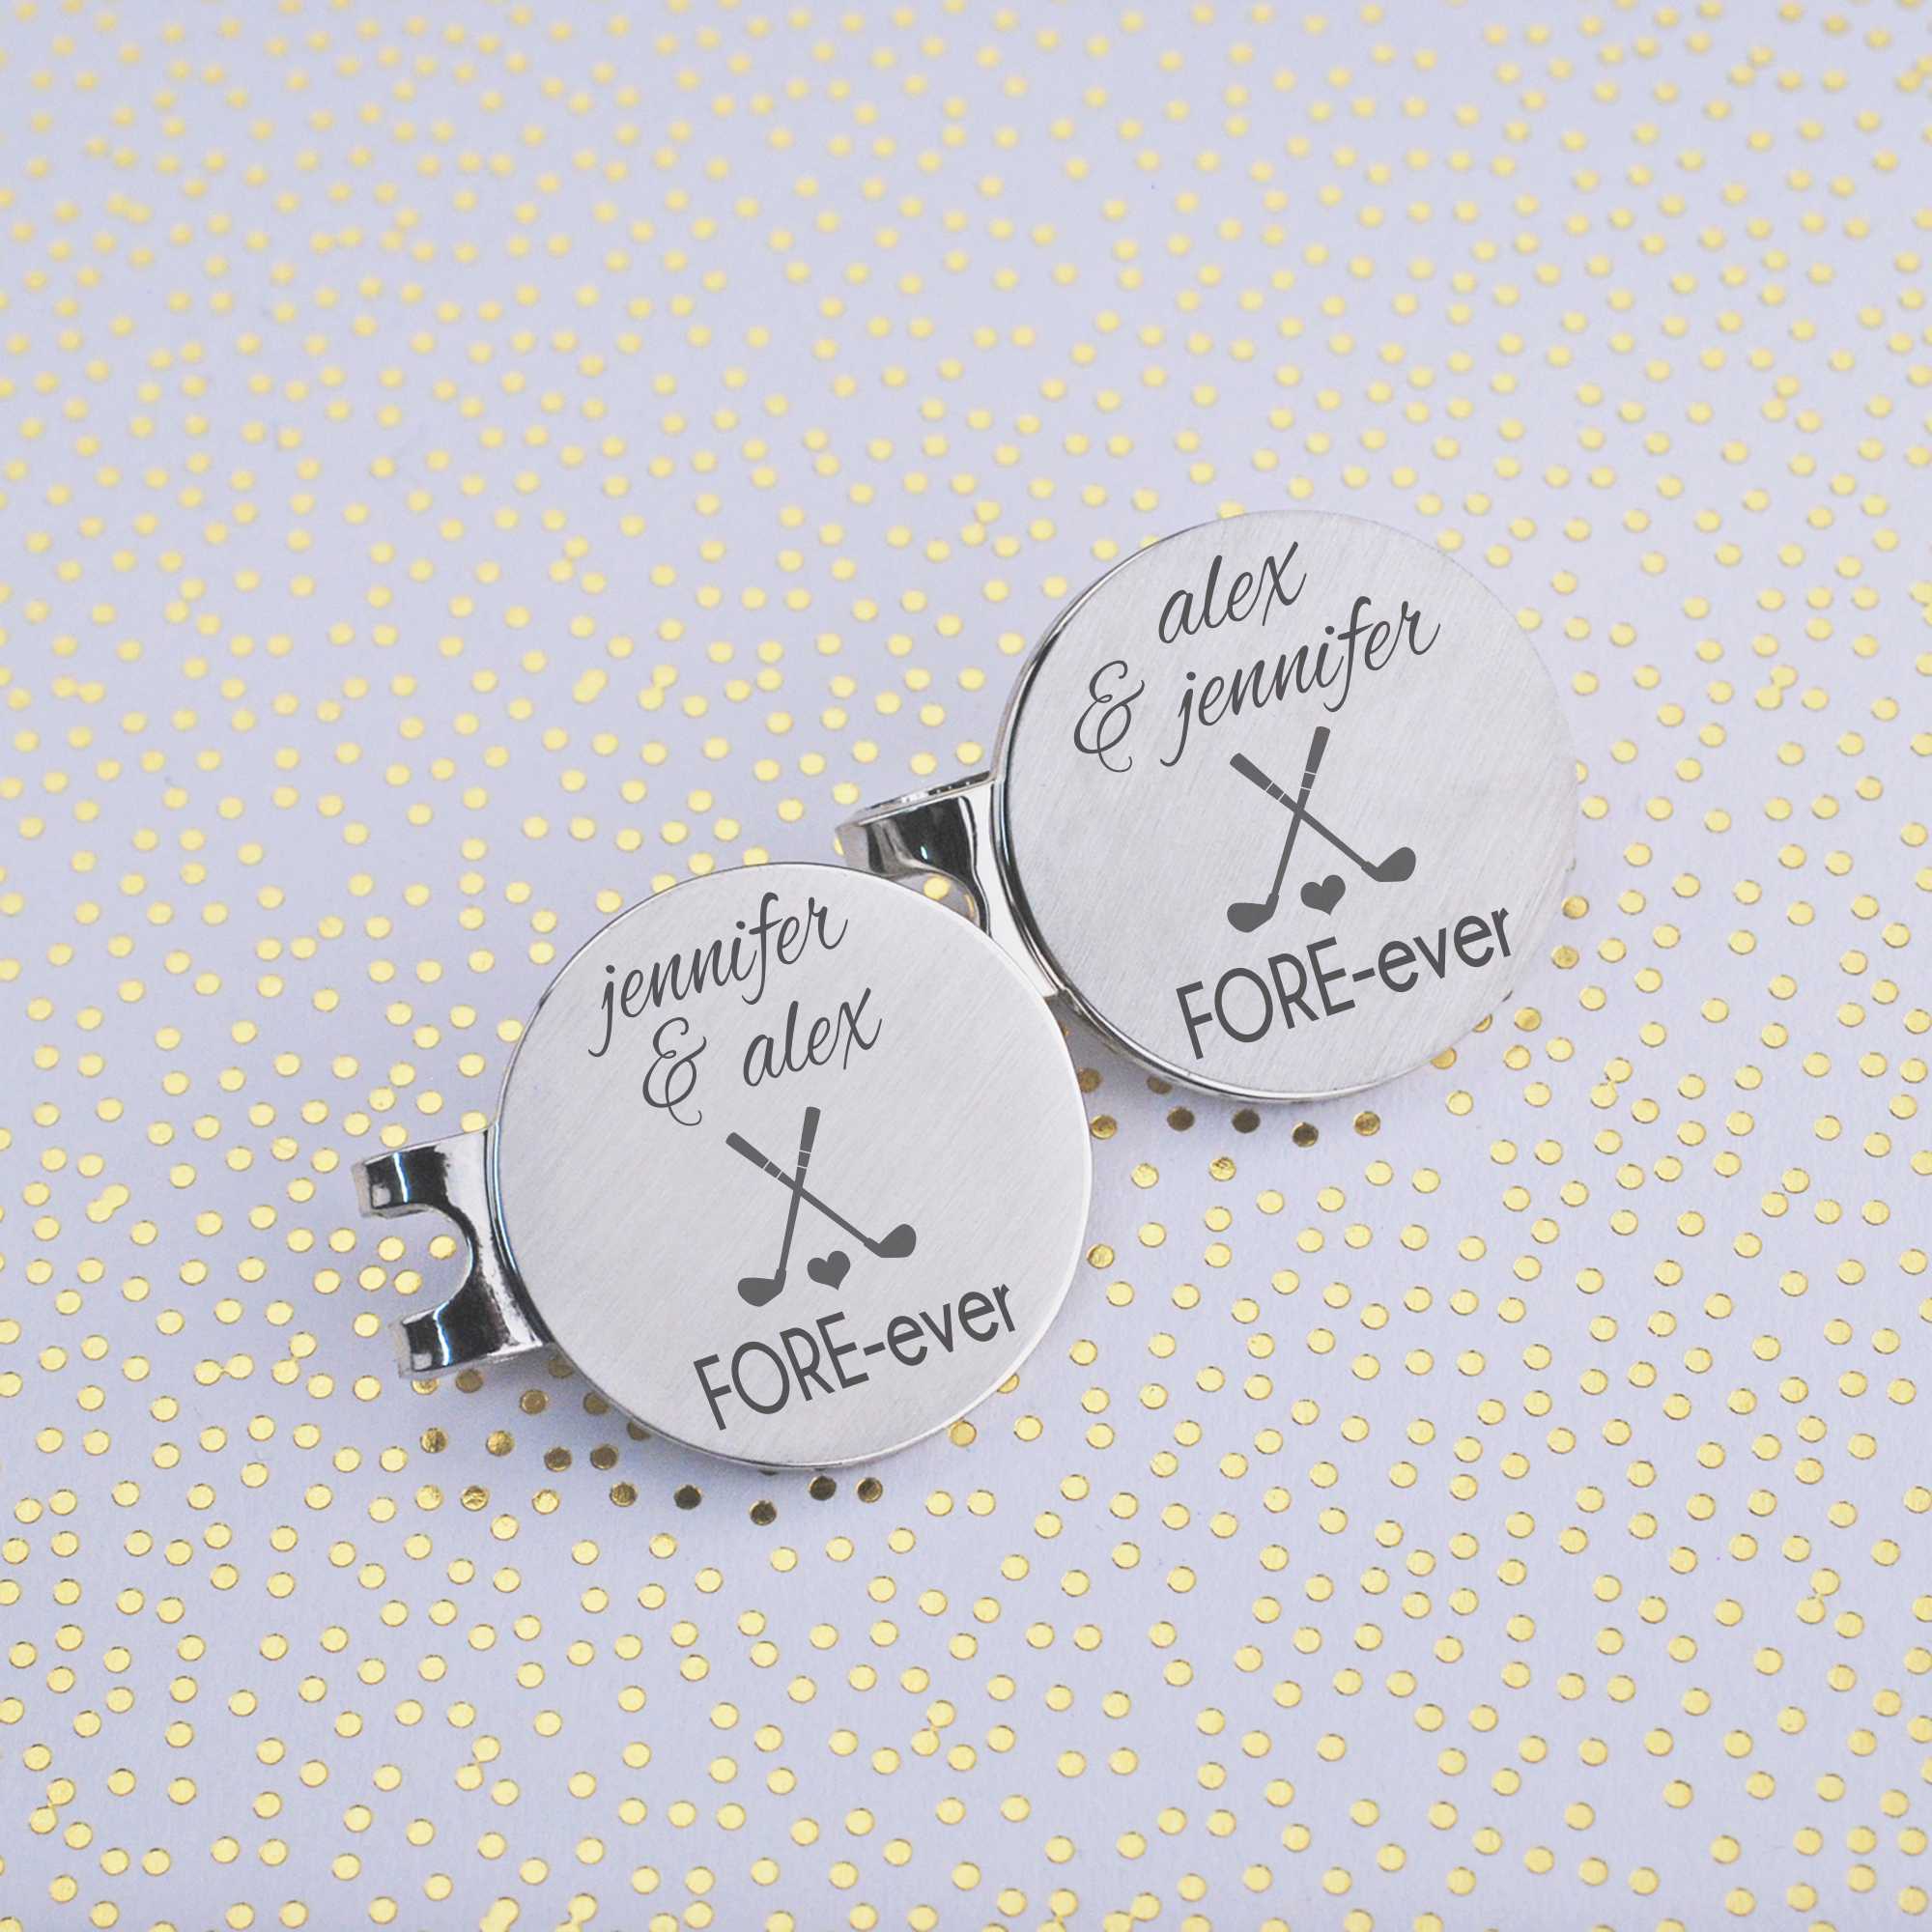 Fore-ever - Golf Ball Marker Set for Couple